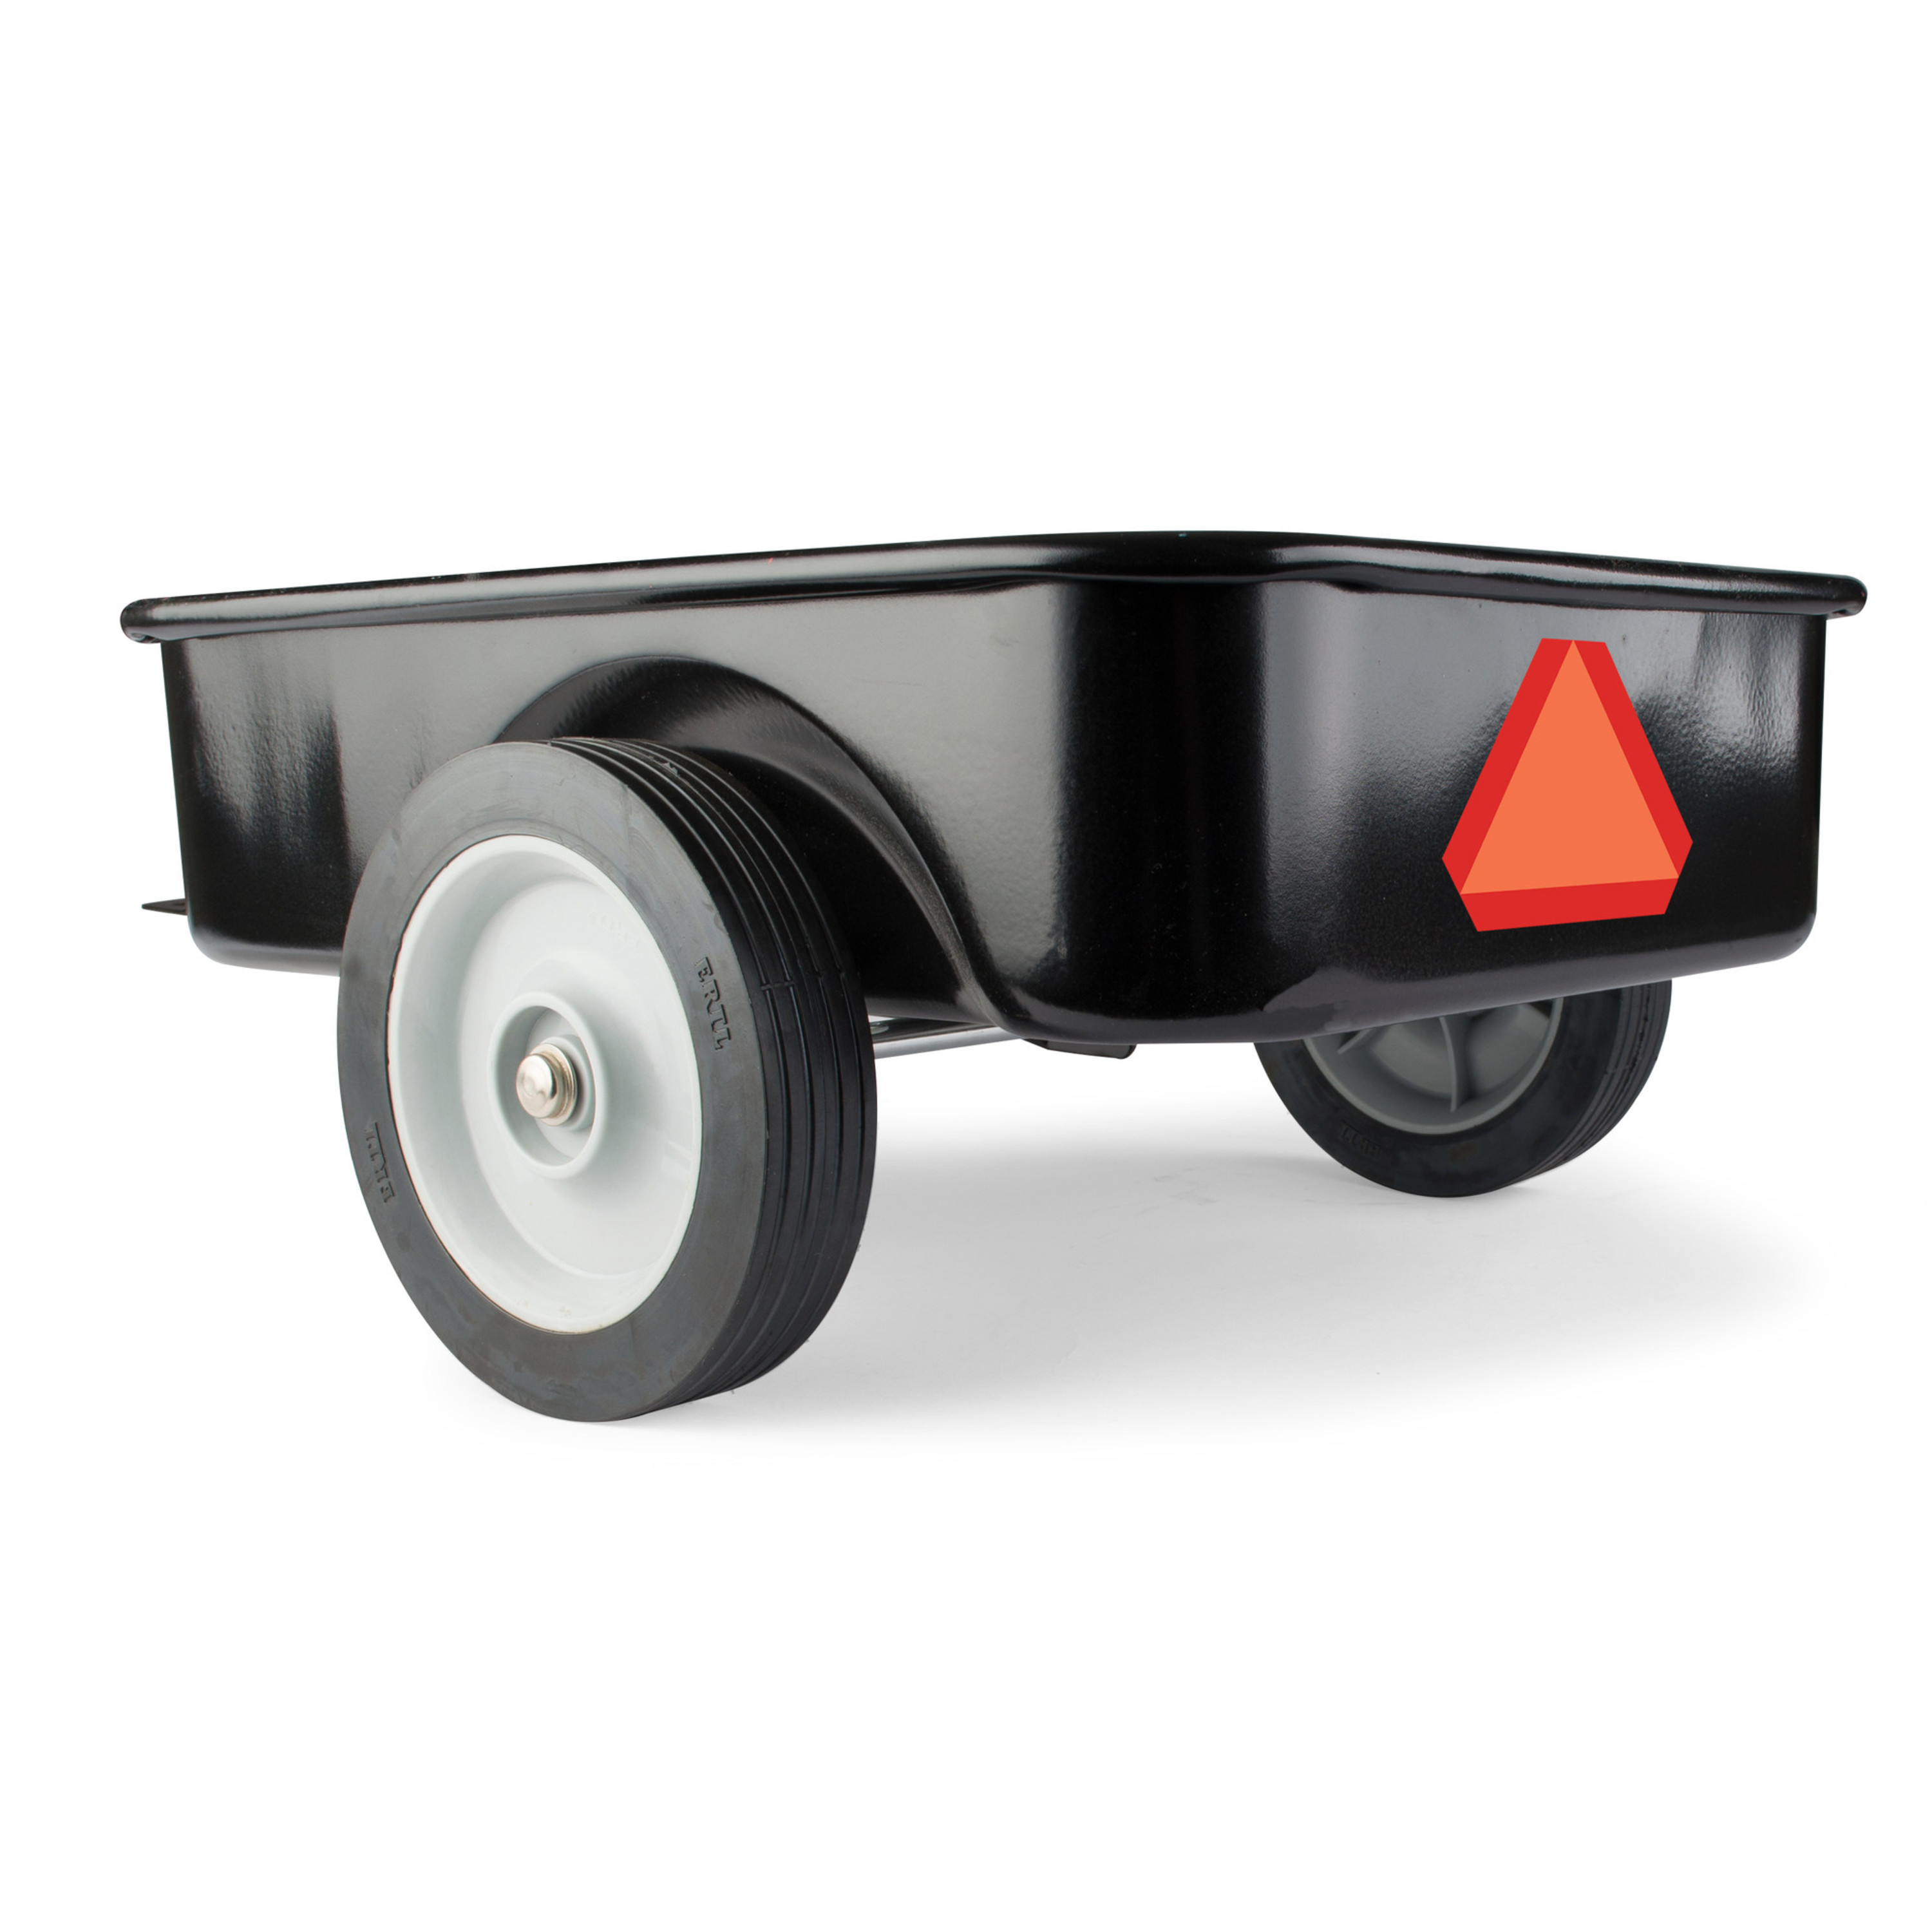 ERTL Steel Trailer Pull Behind for Pedal Tractors - image 2 of 3